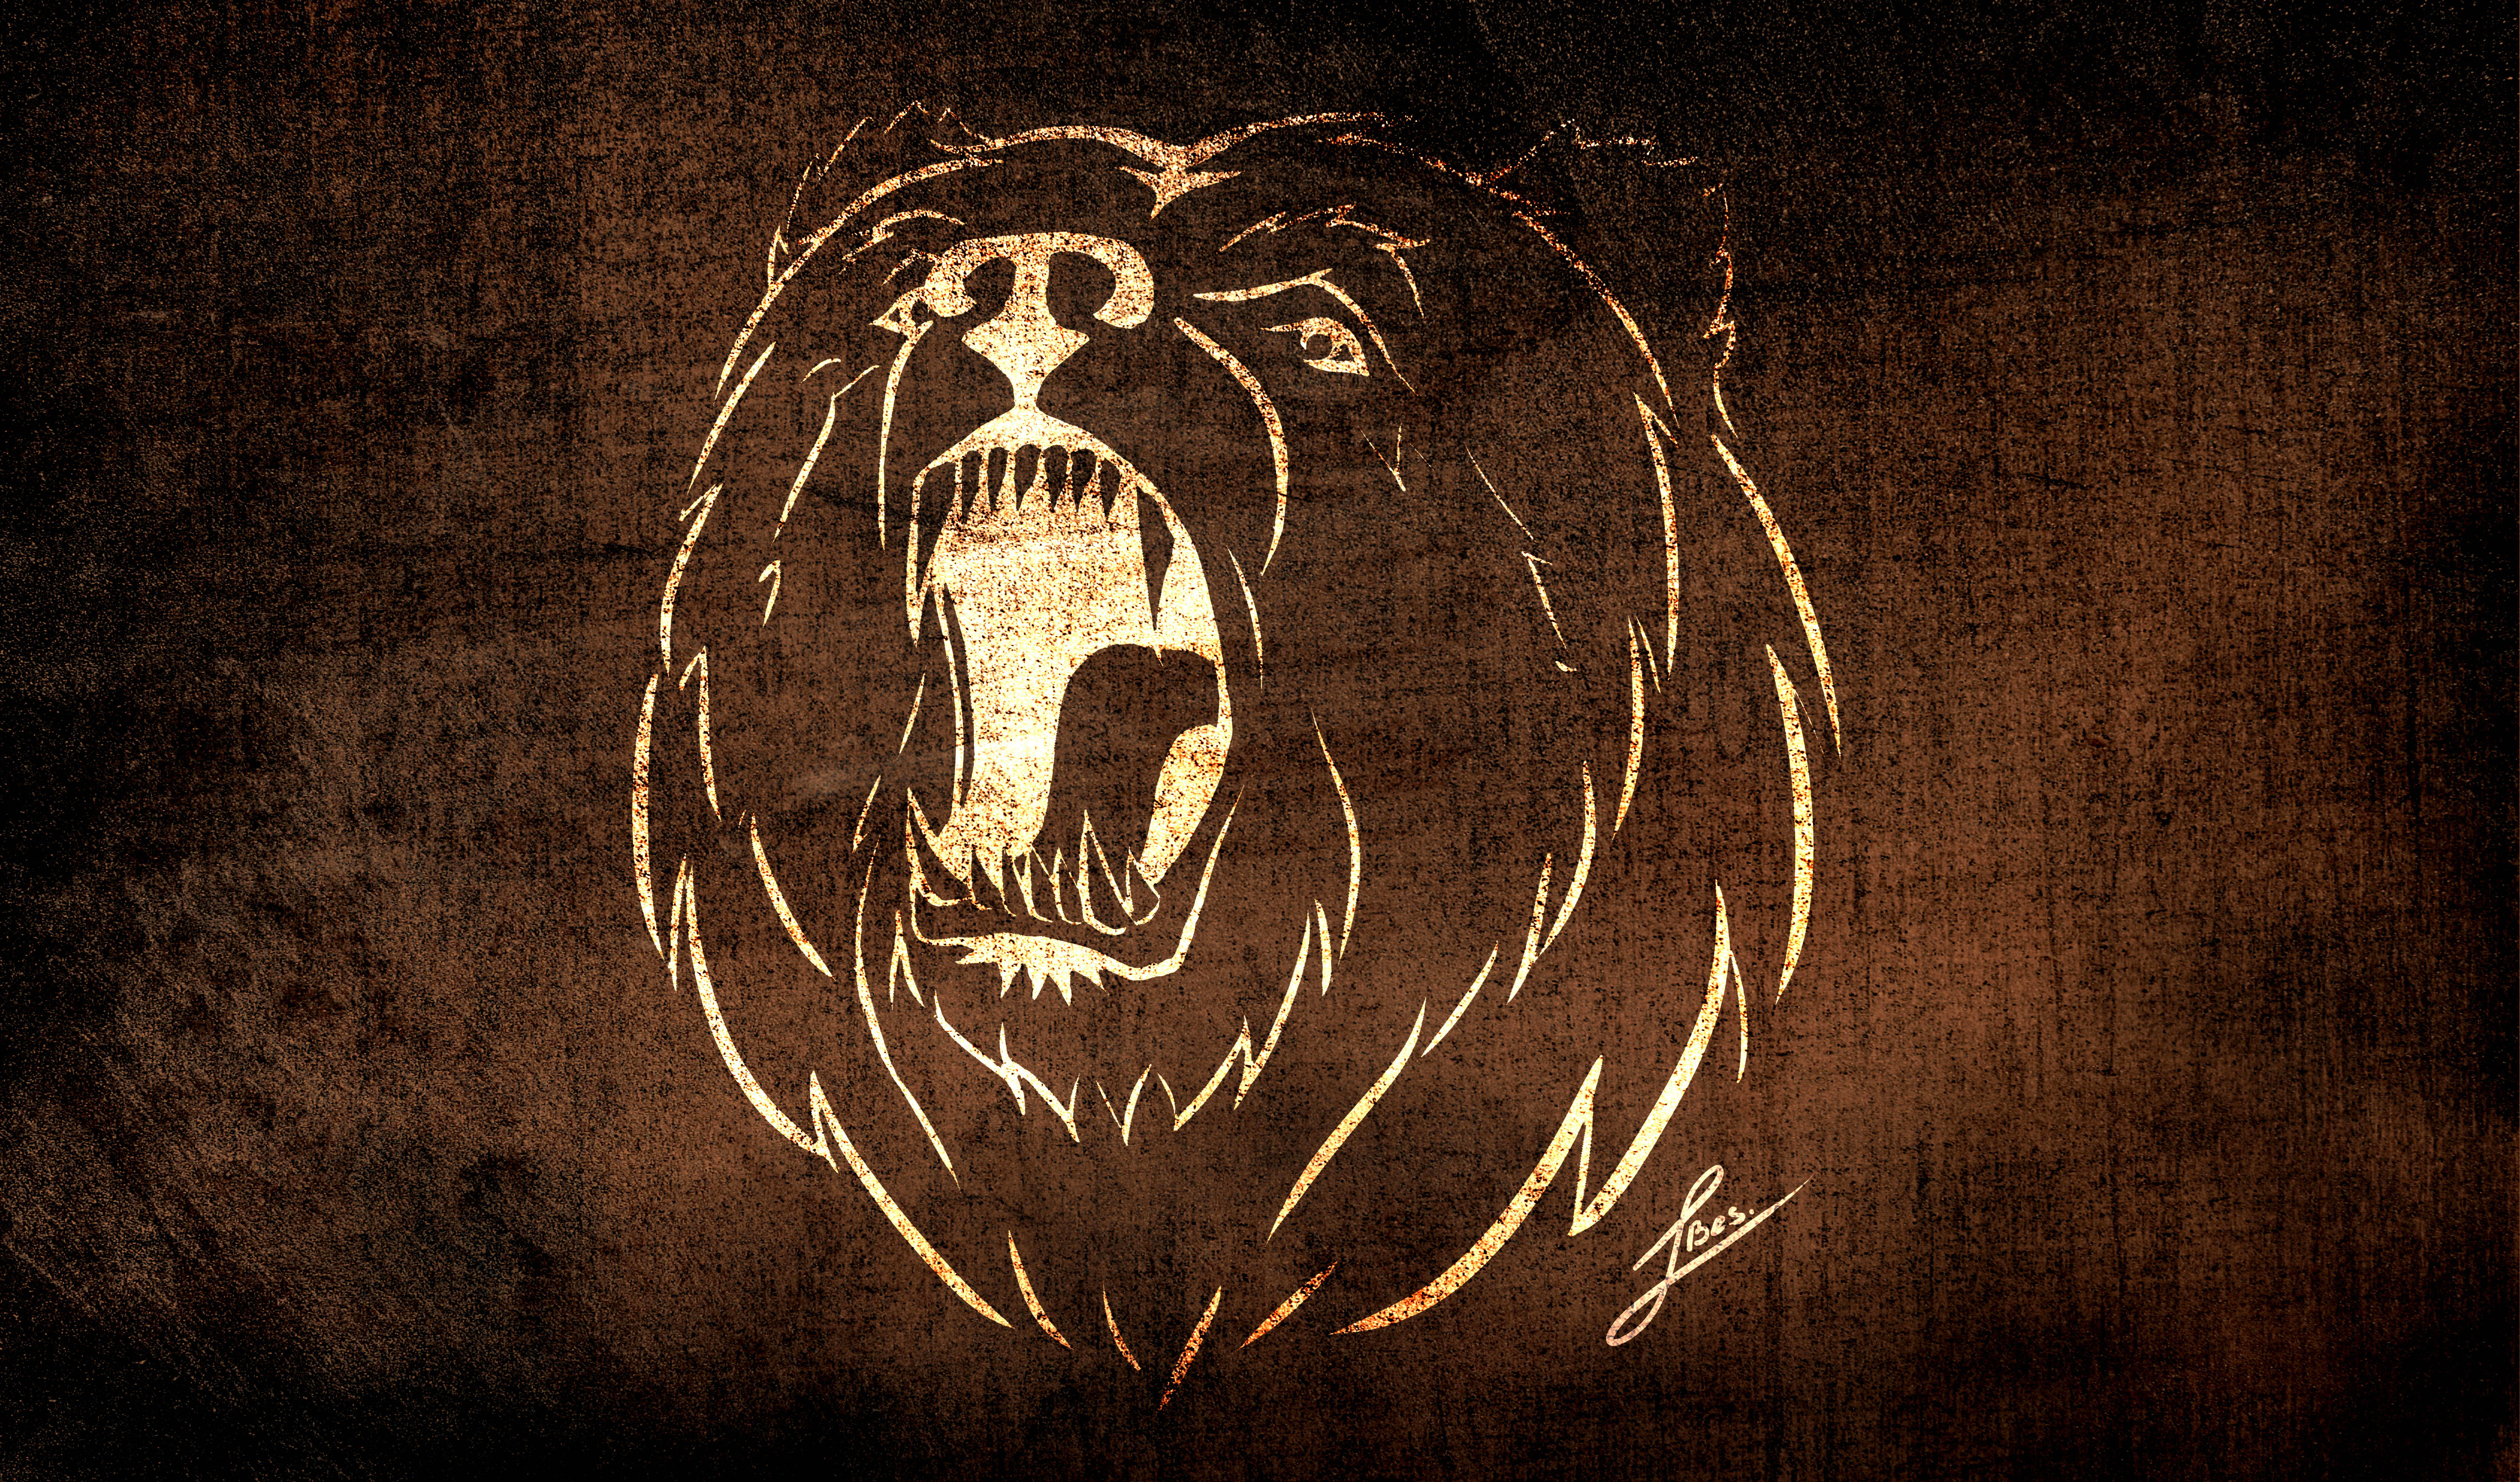 Download wallpaper background, animal, Wallpaper, figure, spirit, texture,  styling, bear, bear, fangs, grin, evil, brown, collection, brown, Russian,  section minimalism in resolution 6800x4000